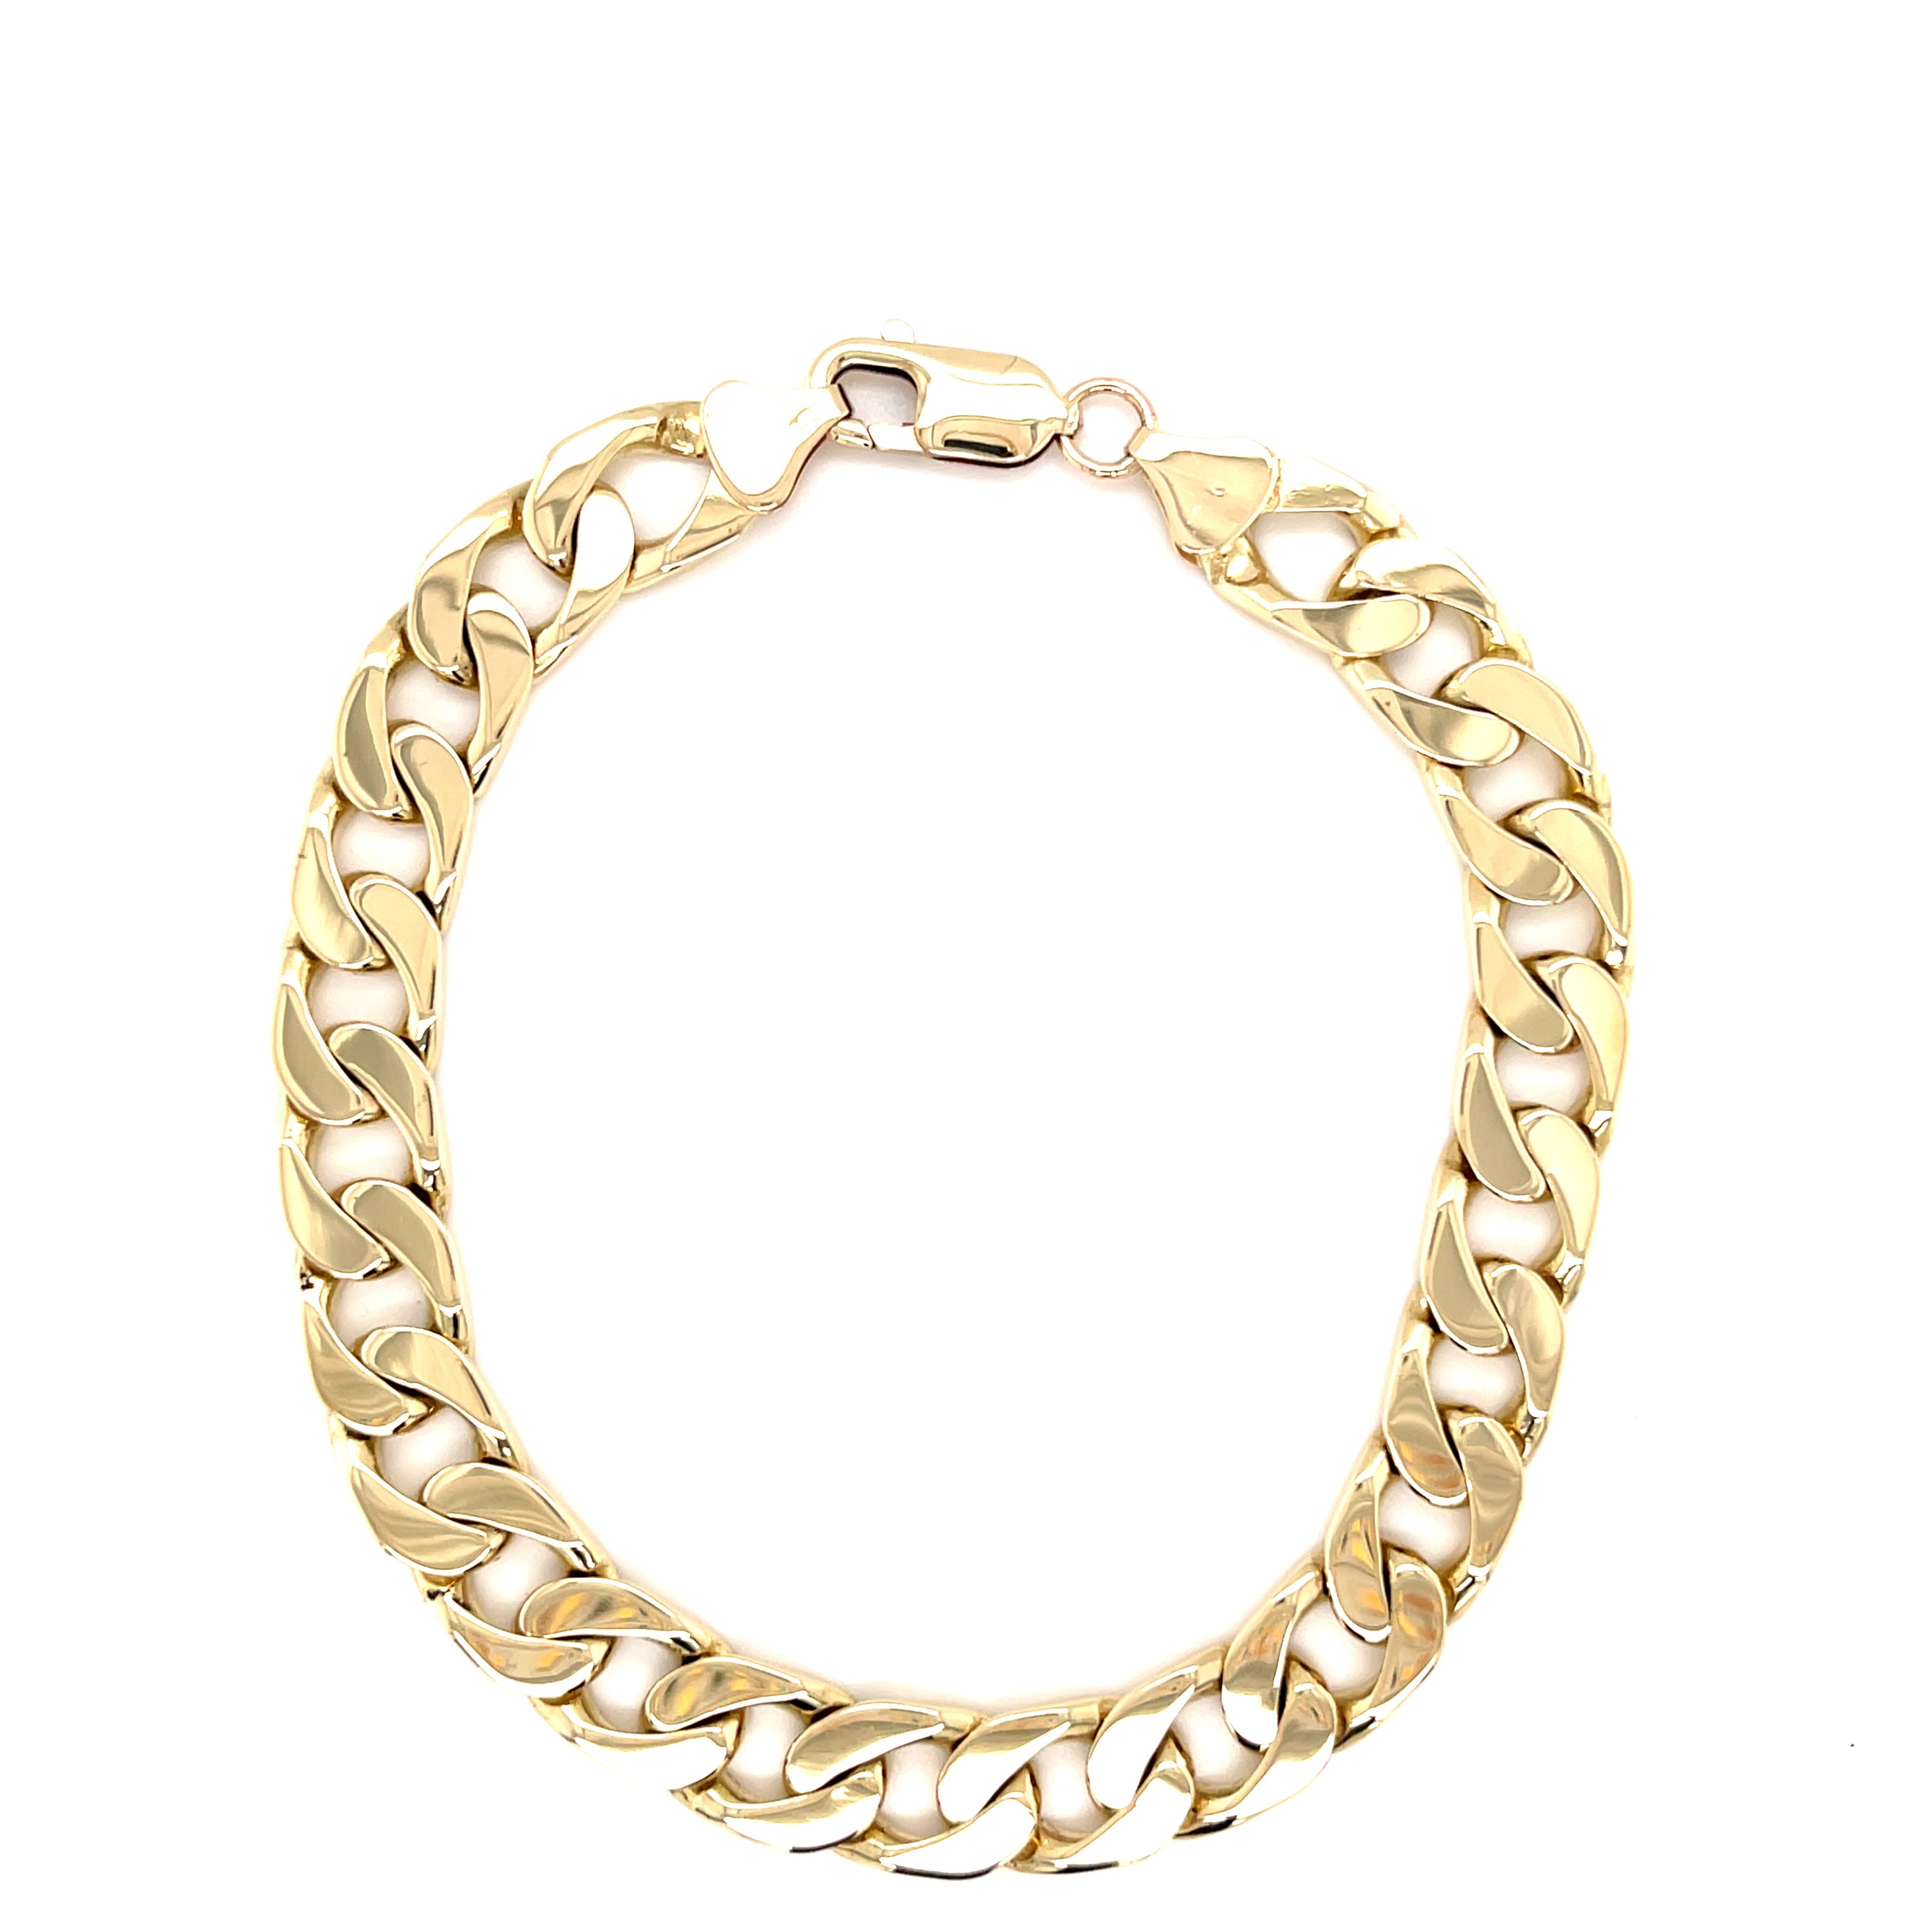 9ct Yellow Gold 9.50" Flat Edge Curb Link Bracelet - 34.00g SOLD